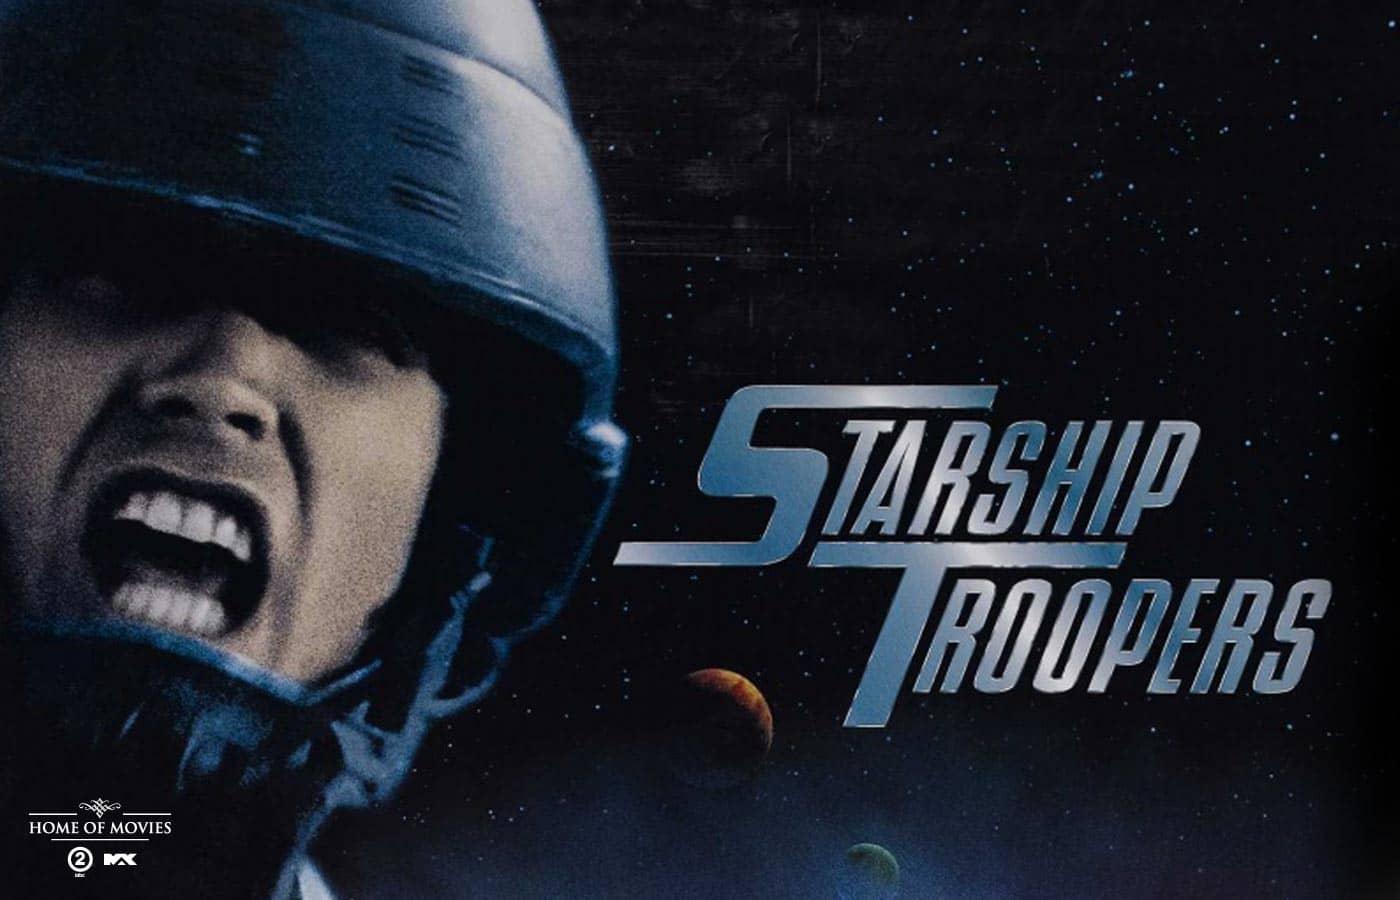 Starship Troopers 4K 1997 big poster